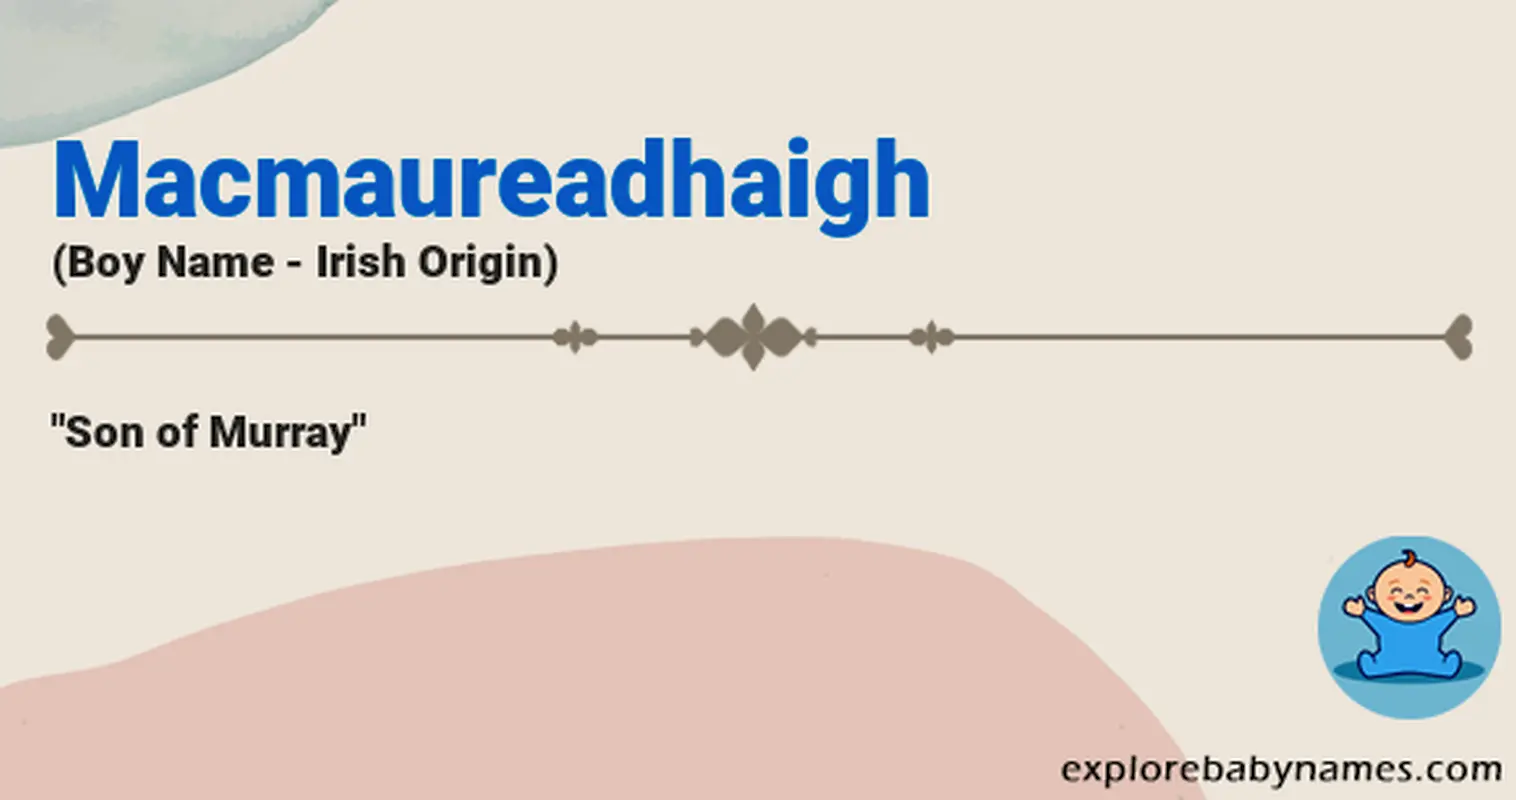 Meaning of Macmaureadhaigh